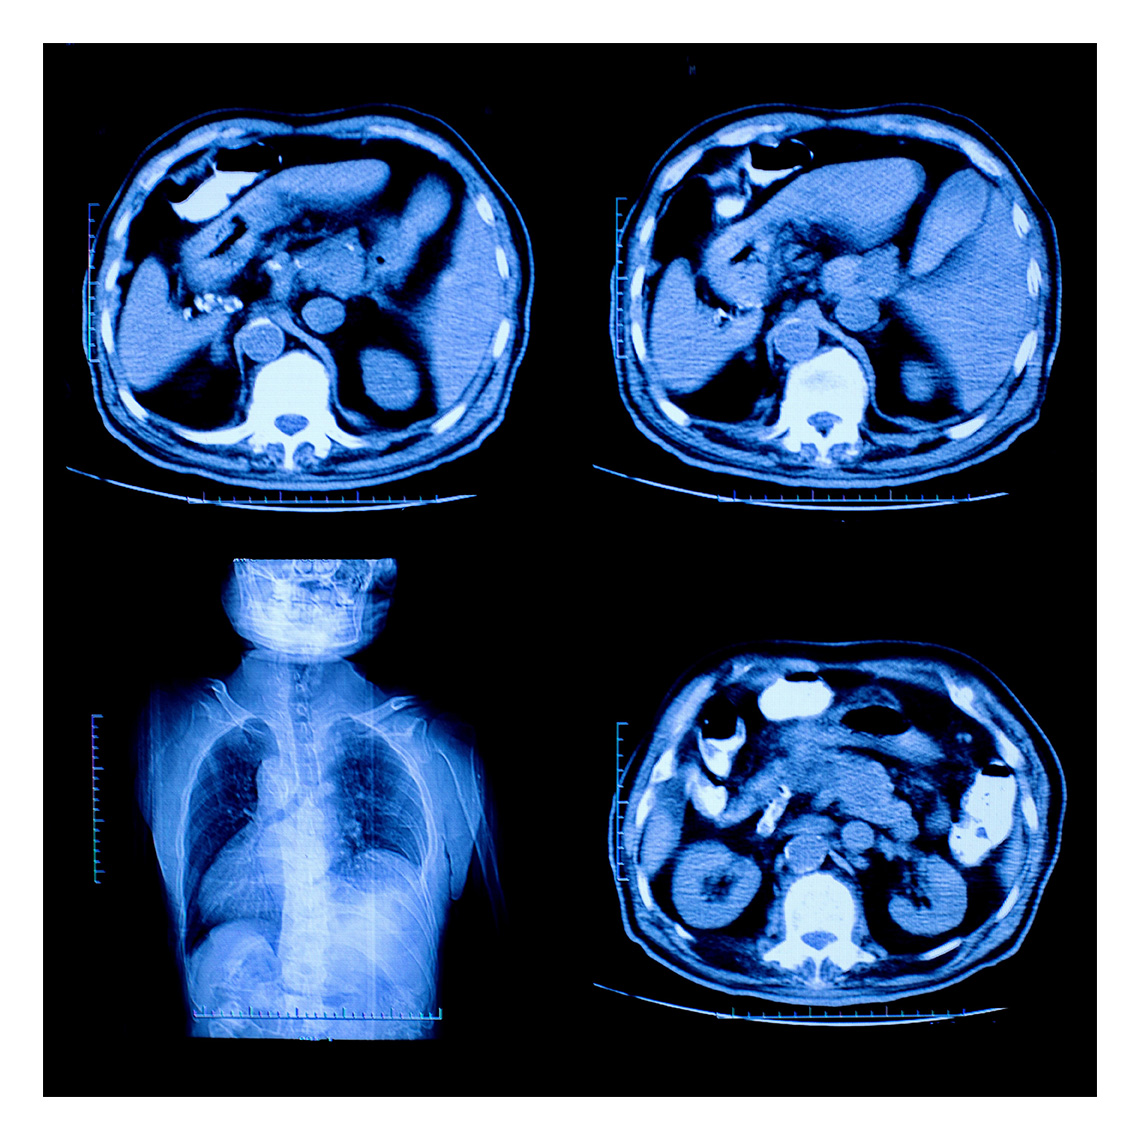 a ct scan